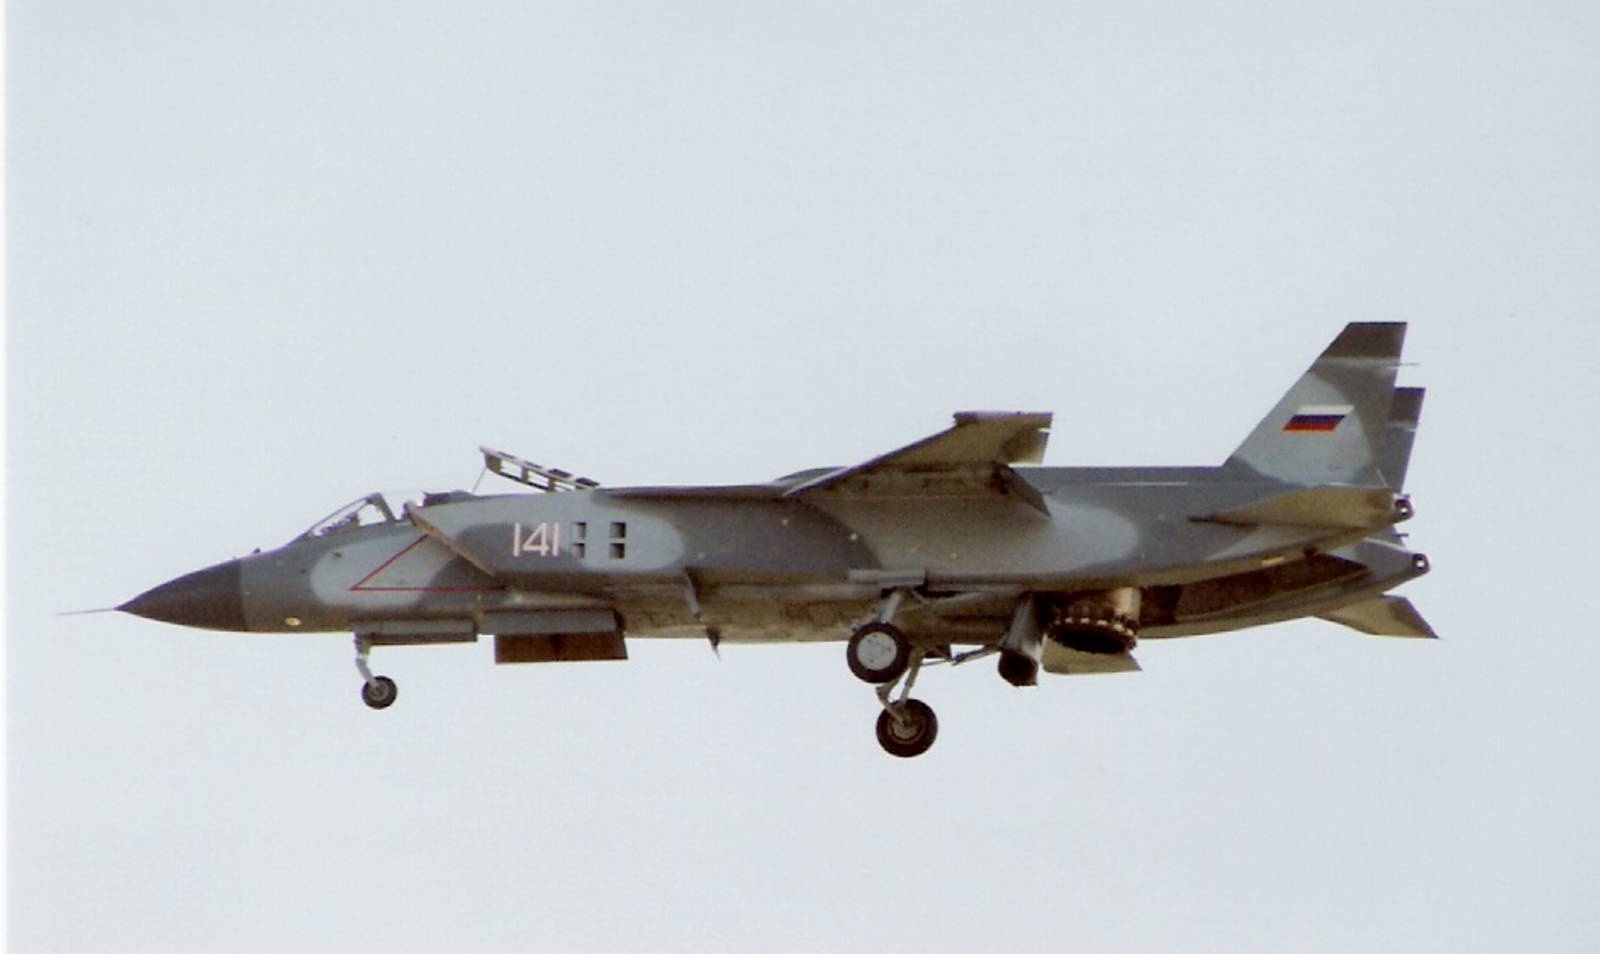 Yak-141 VTOL fighter during hover at 1992 Farnborough Airshow